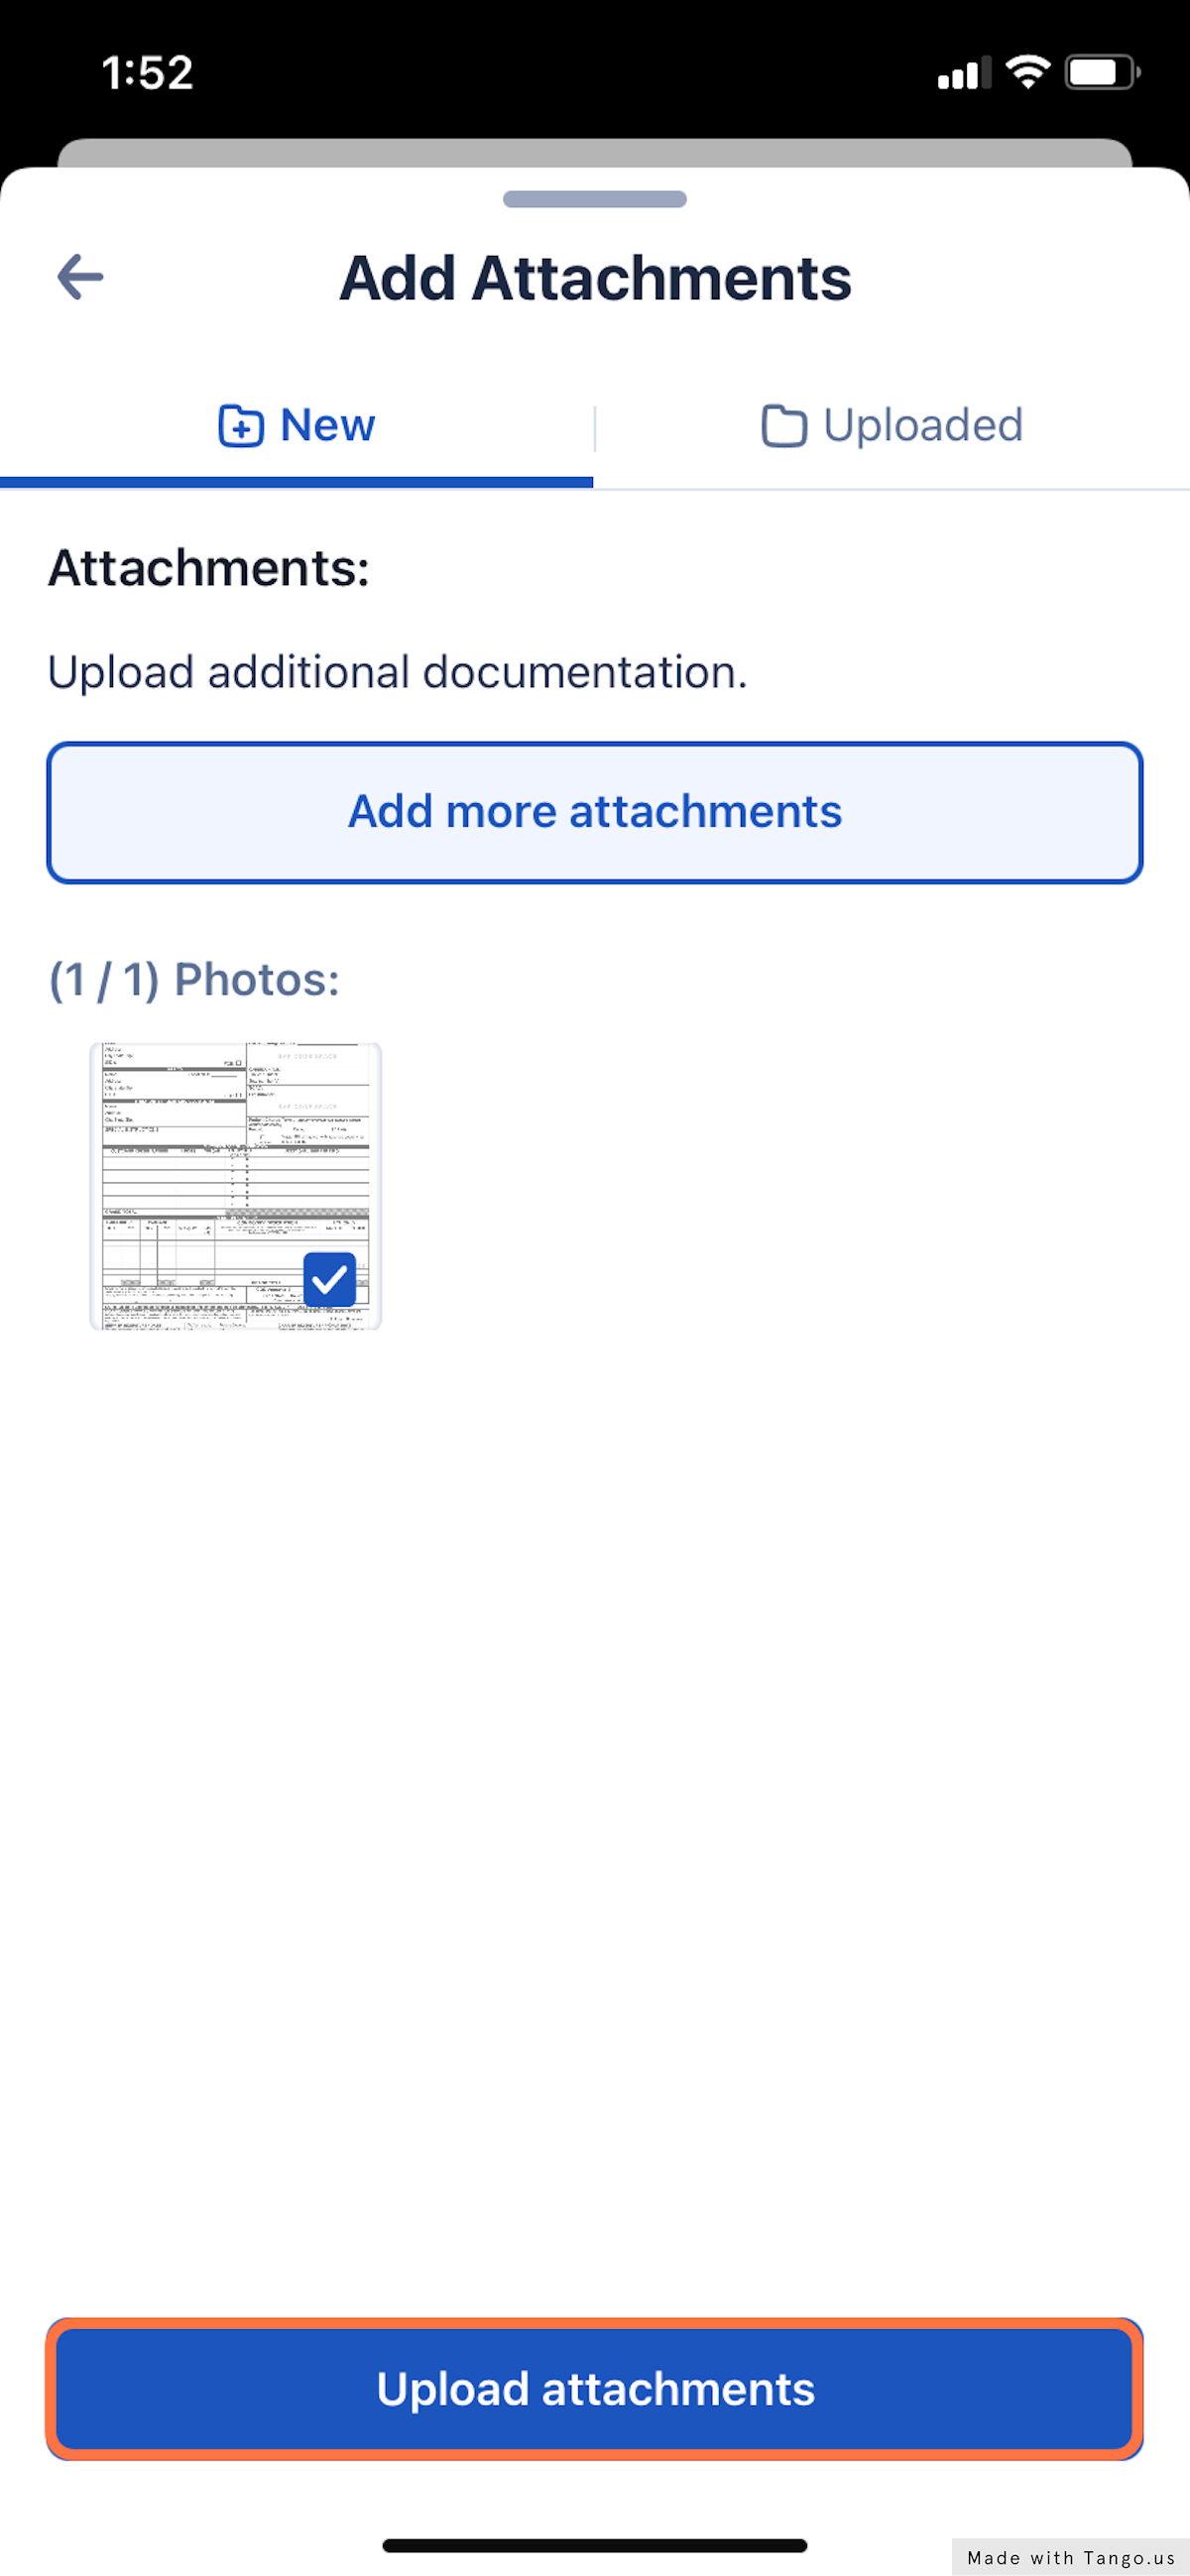 Once the attachment is added, review the document and select 'Upload attachments' to save.